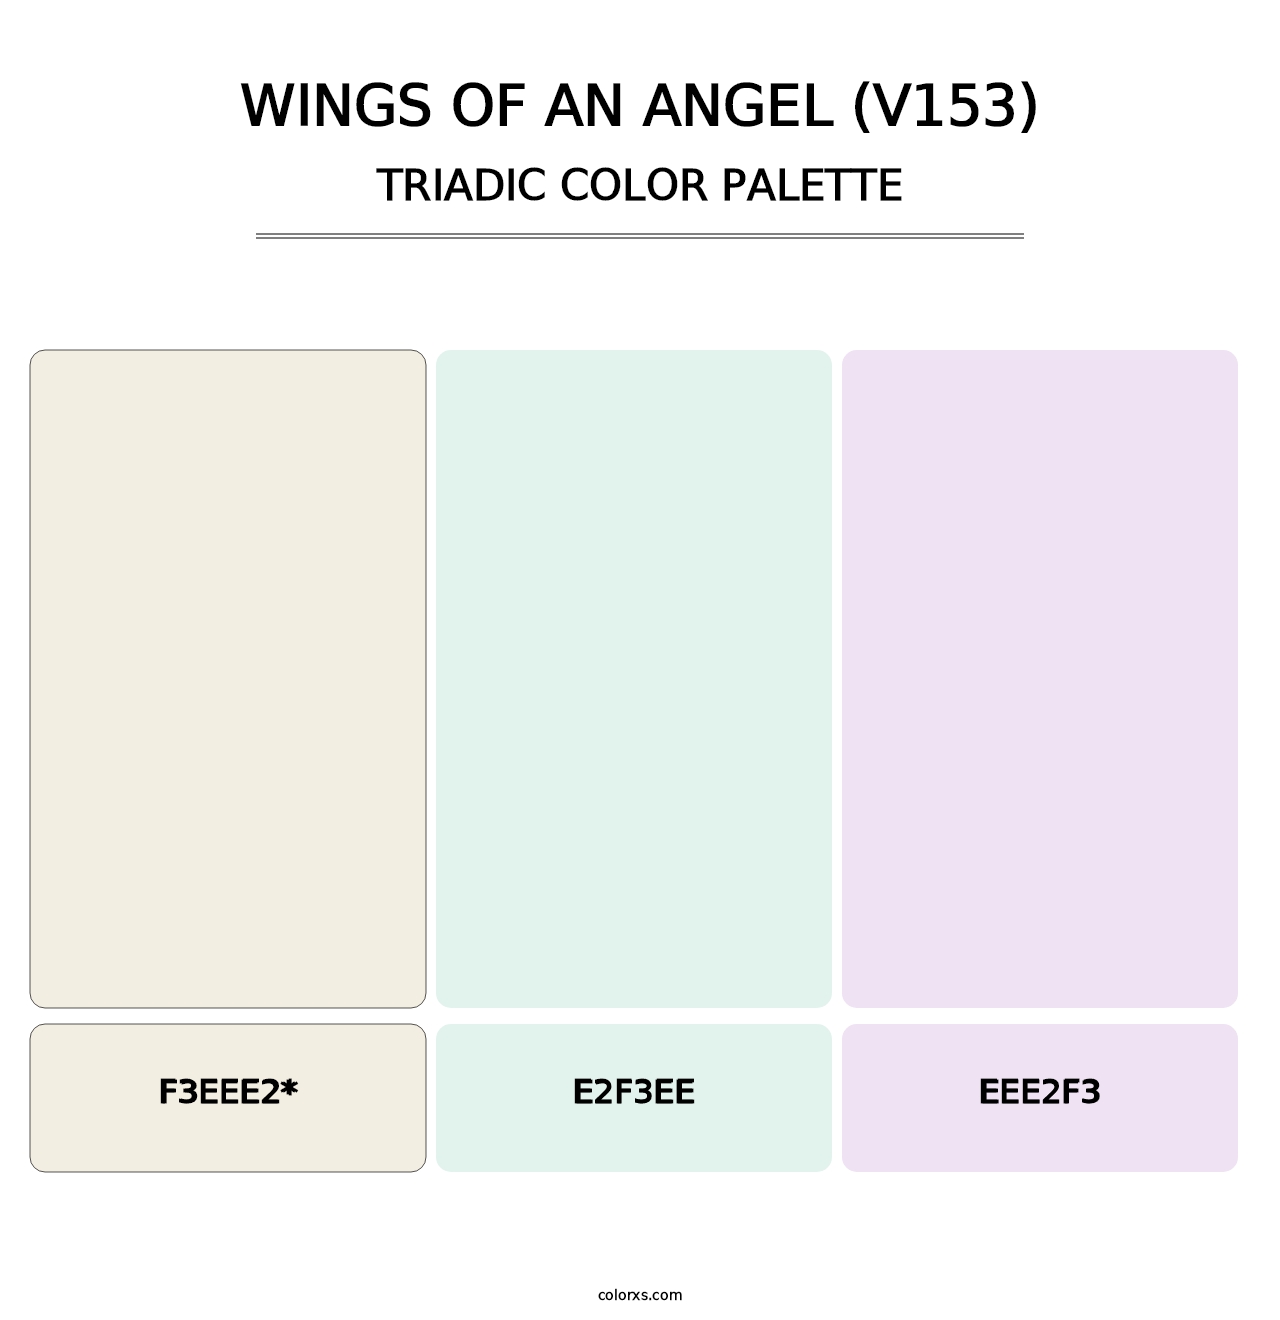 Wings of an Angel (V153) - Triadic Color Palette